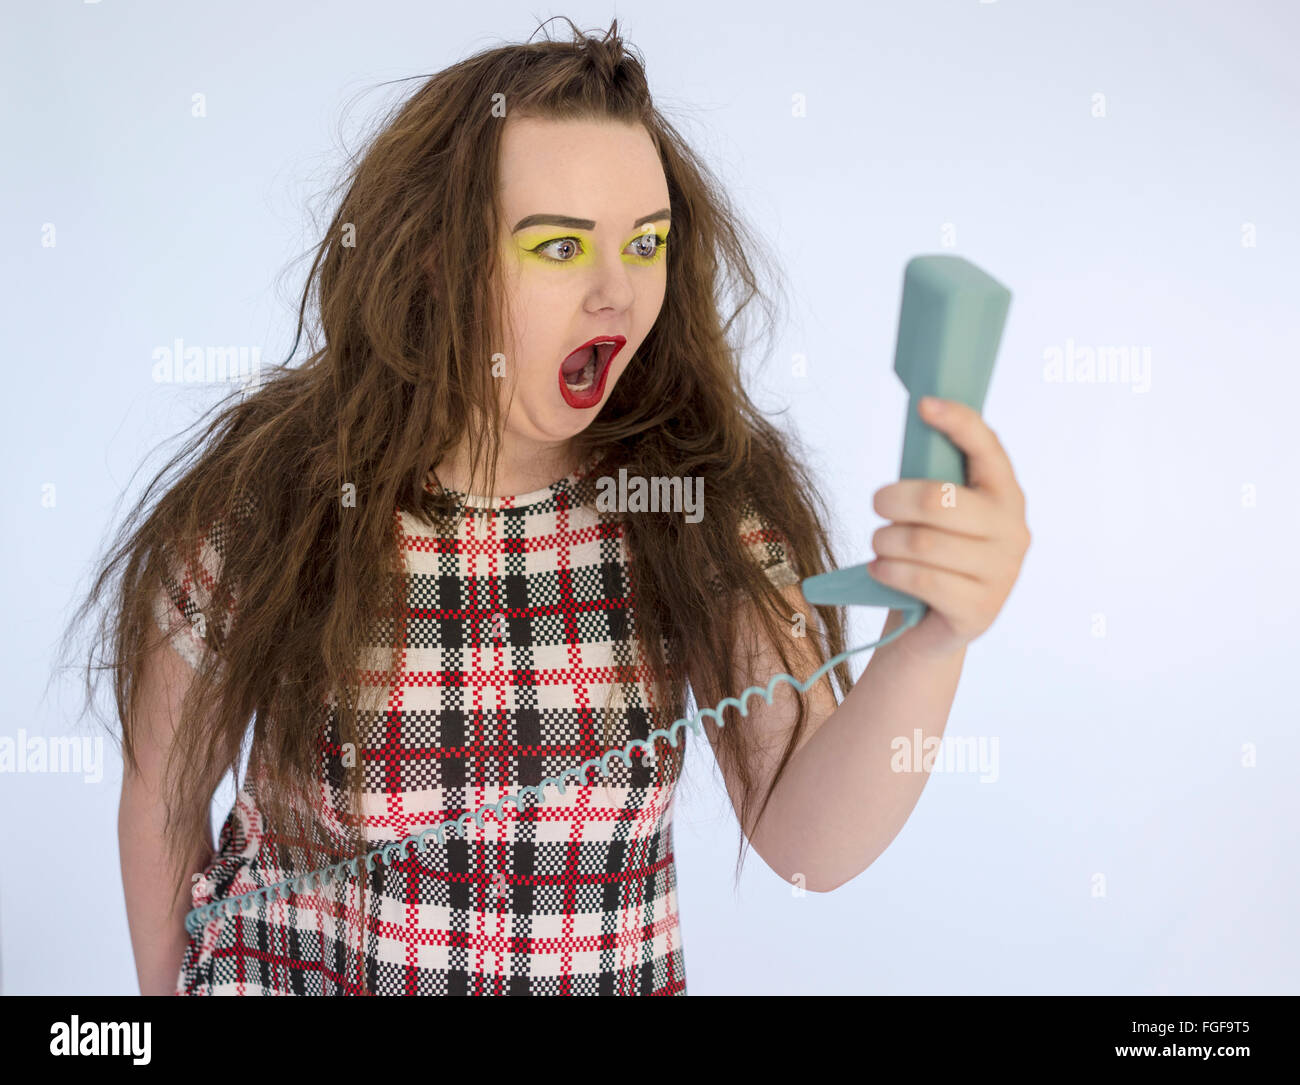 Teenage girl screaming at a blue retro telephone handset in her hand Stock Photo